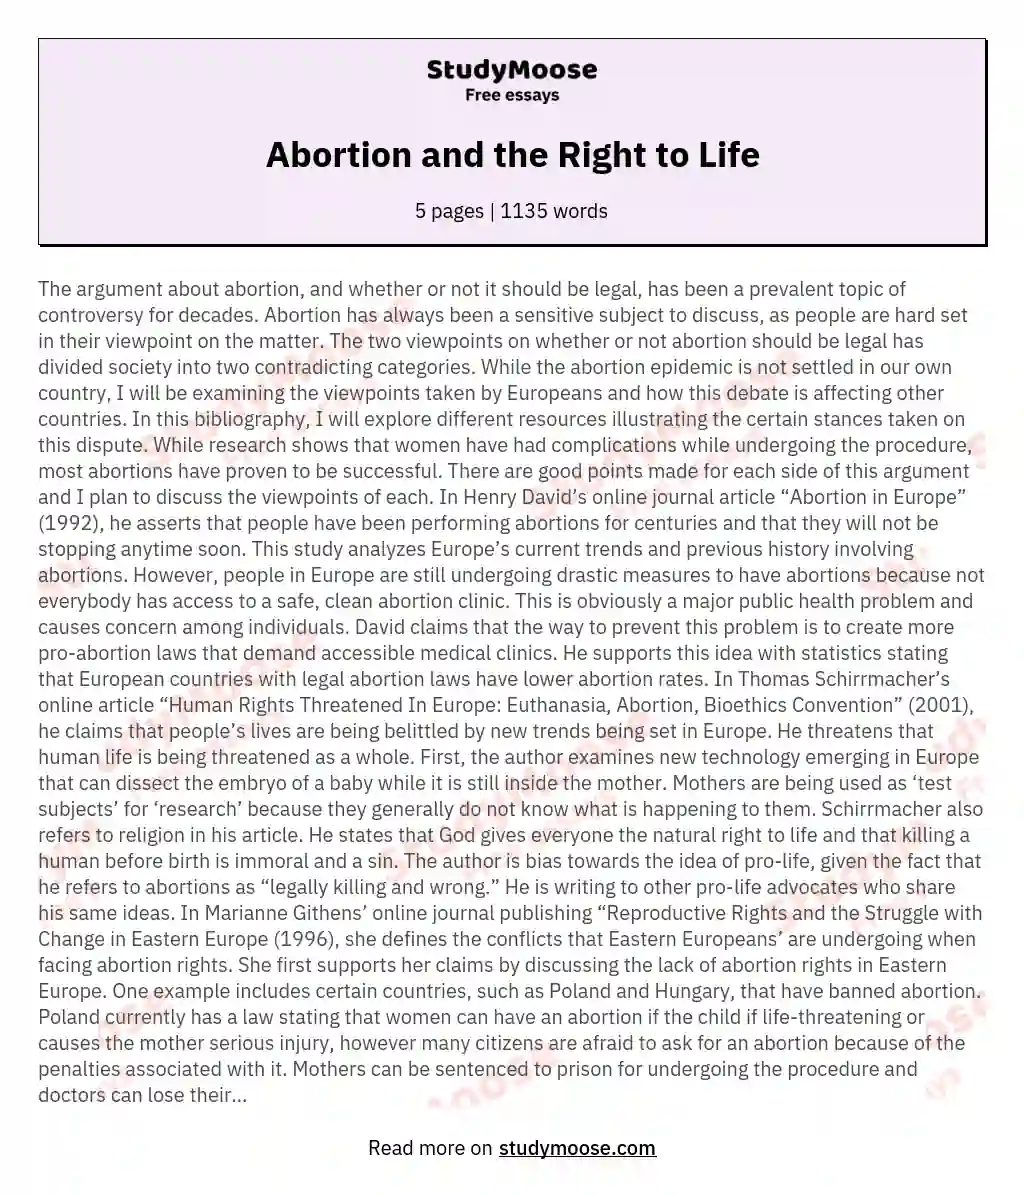 Abortion and the Right to Life essay